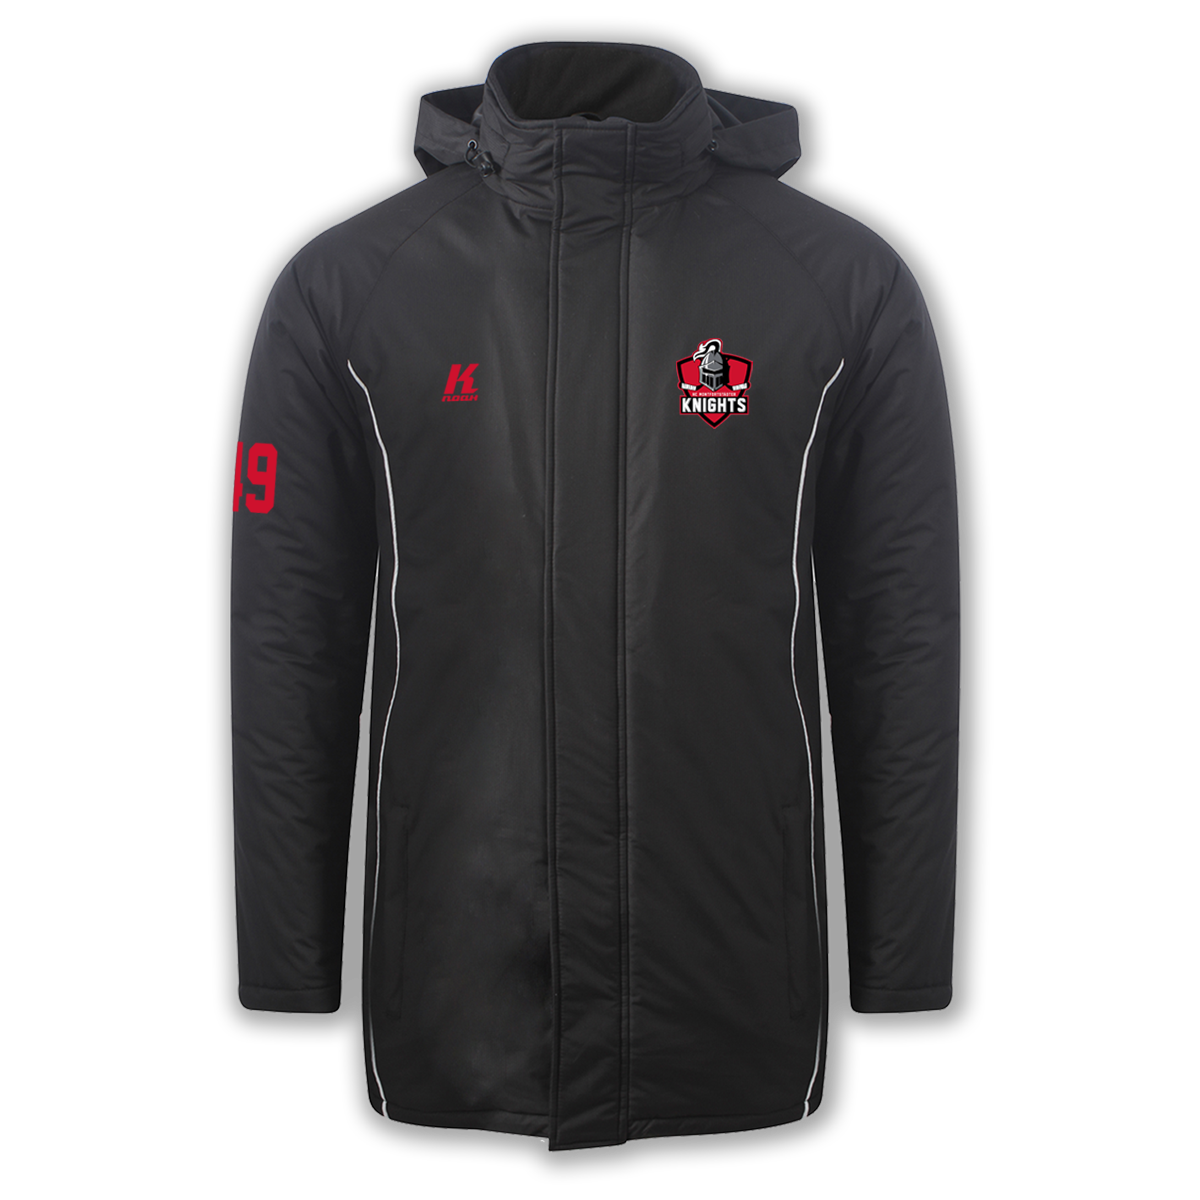 HCK Stadium Jacket with Playernumber/Initials